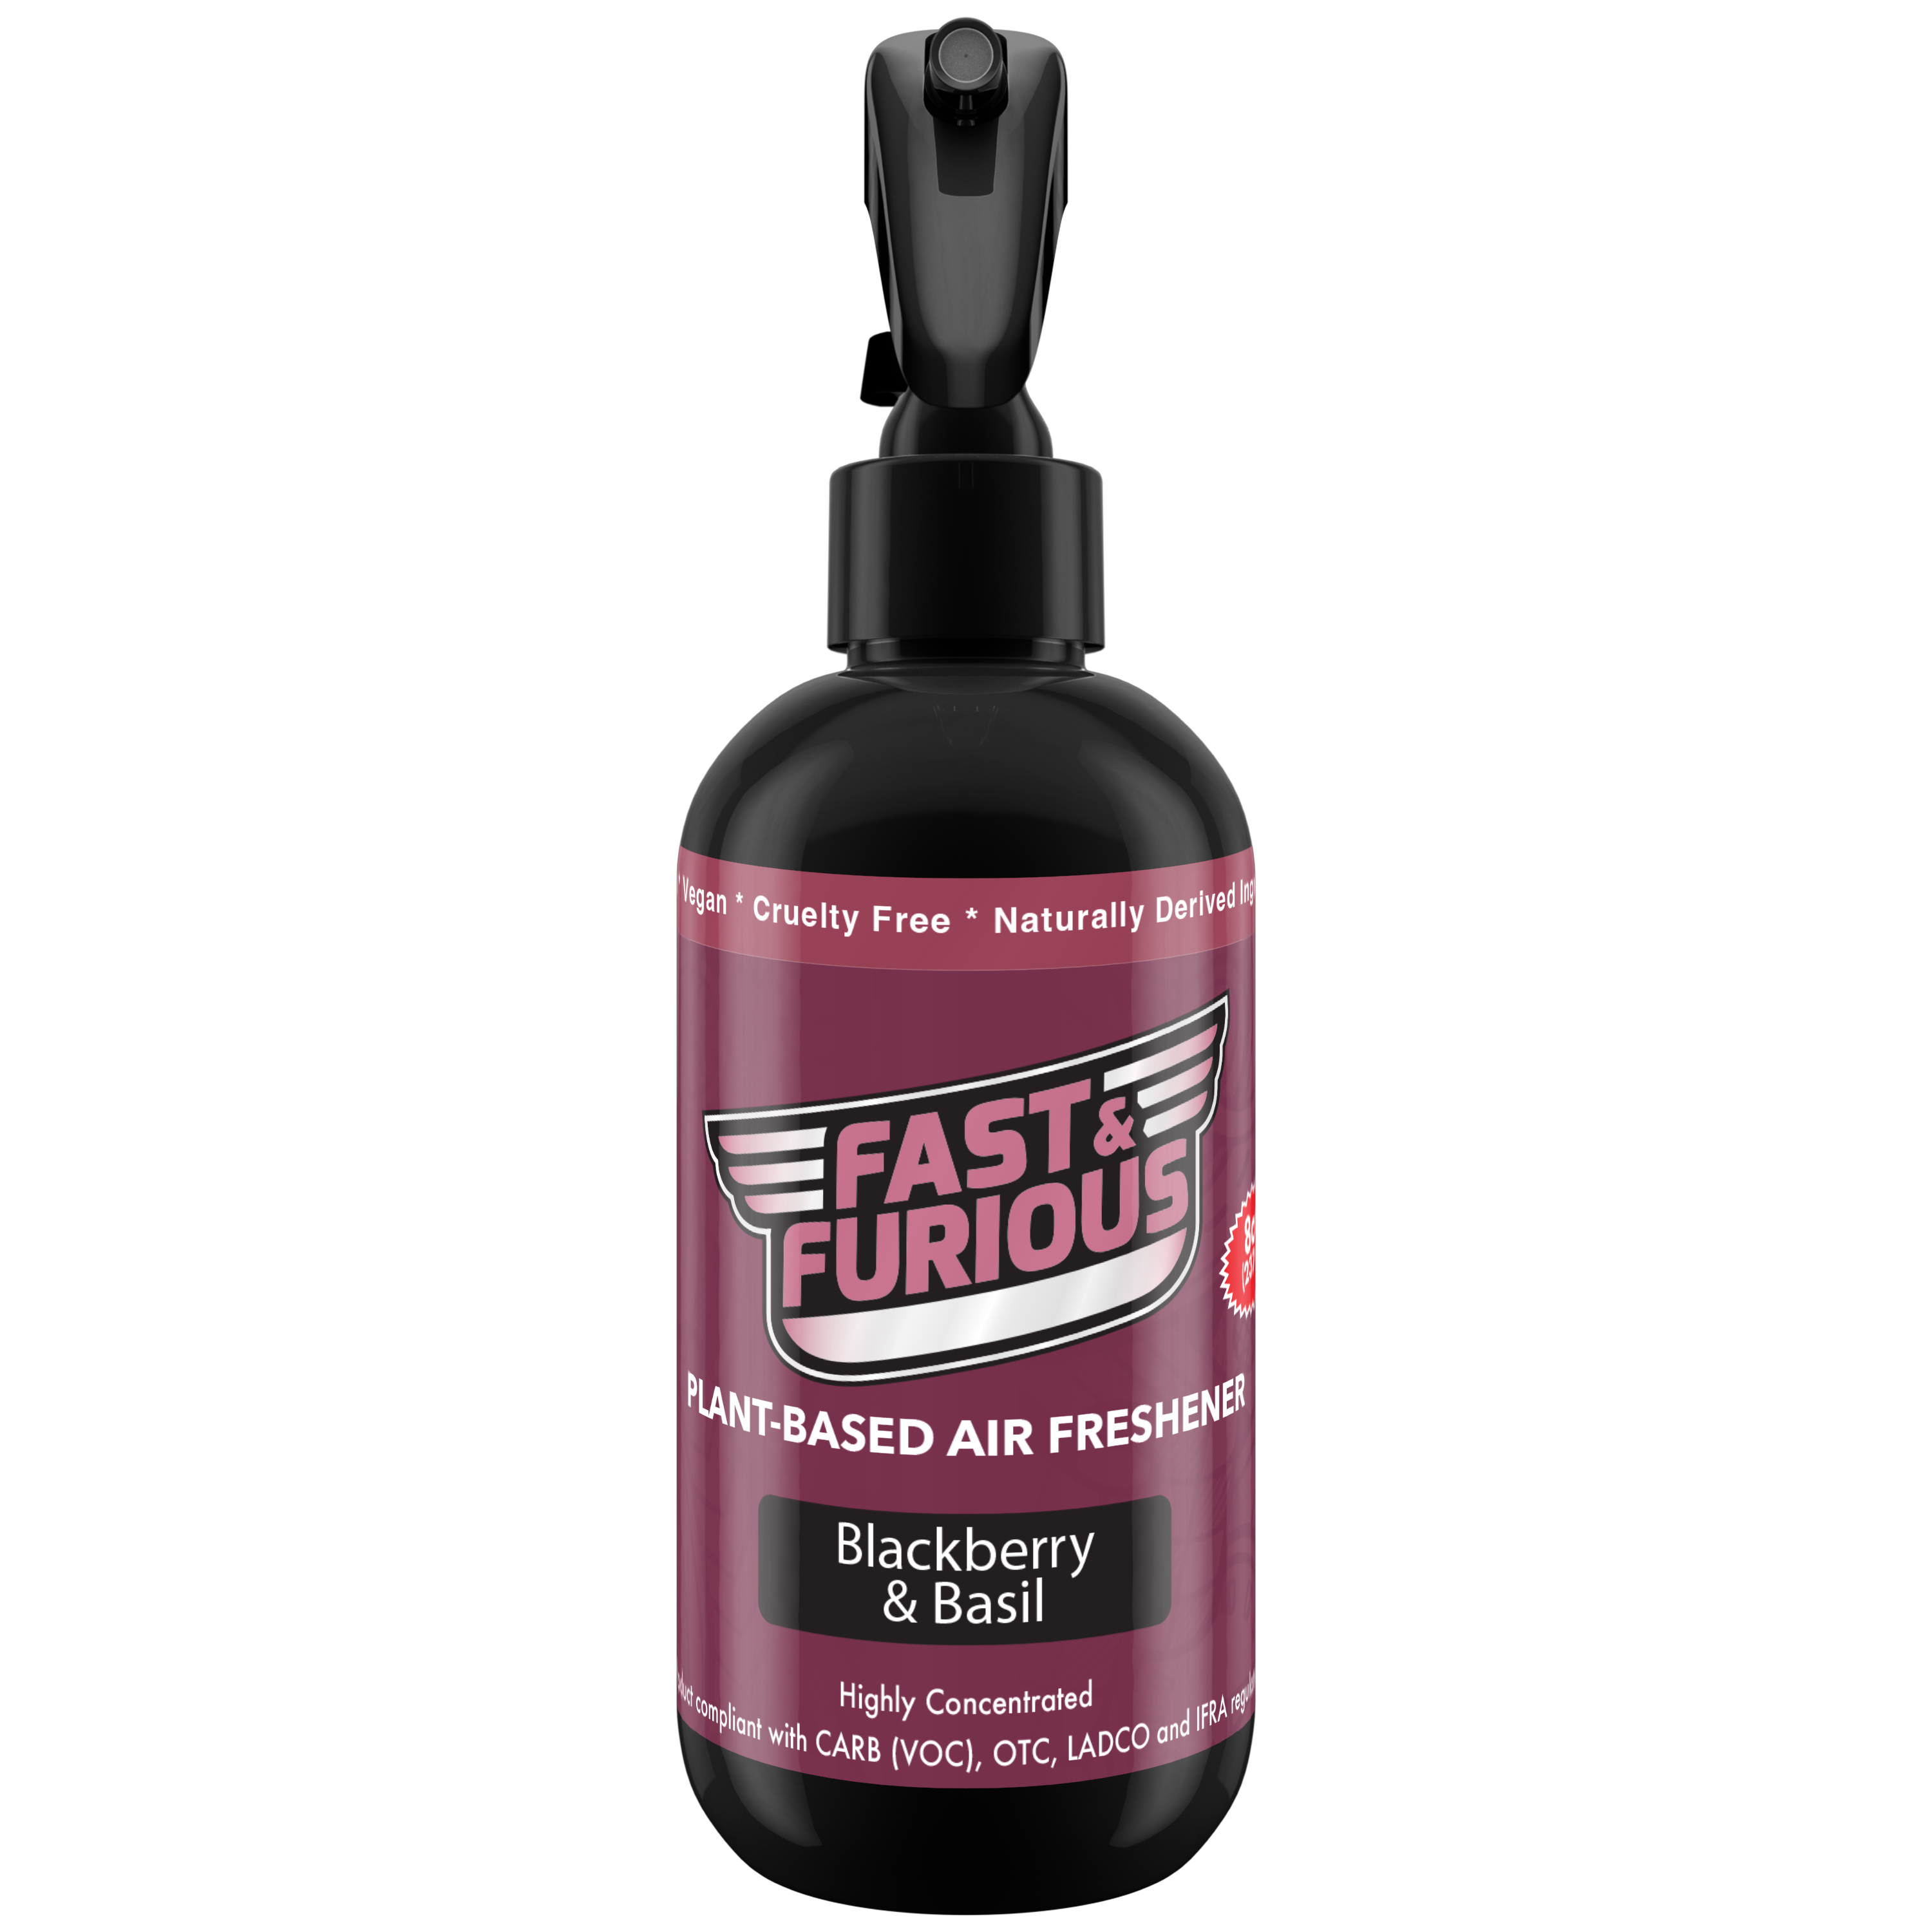 Fast and Furious Plant-Based Air Freshener - Blackberry & Basil Scent